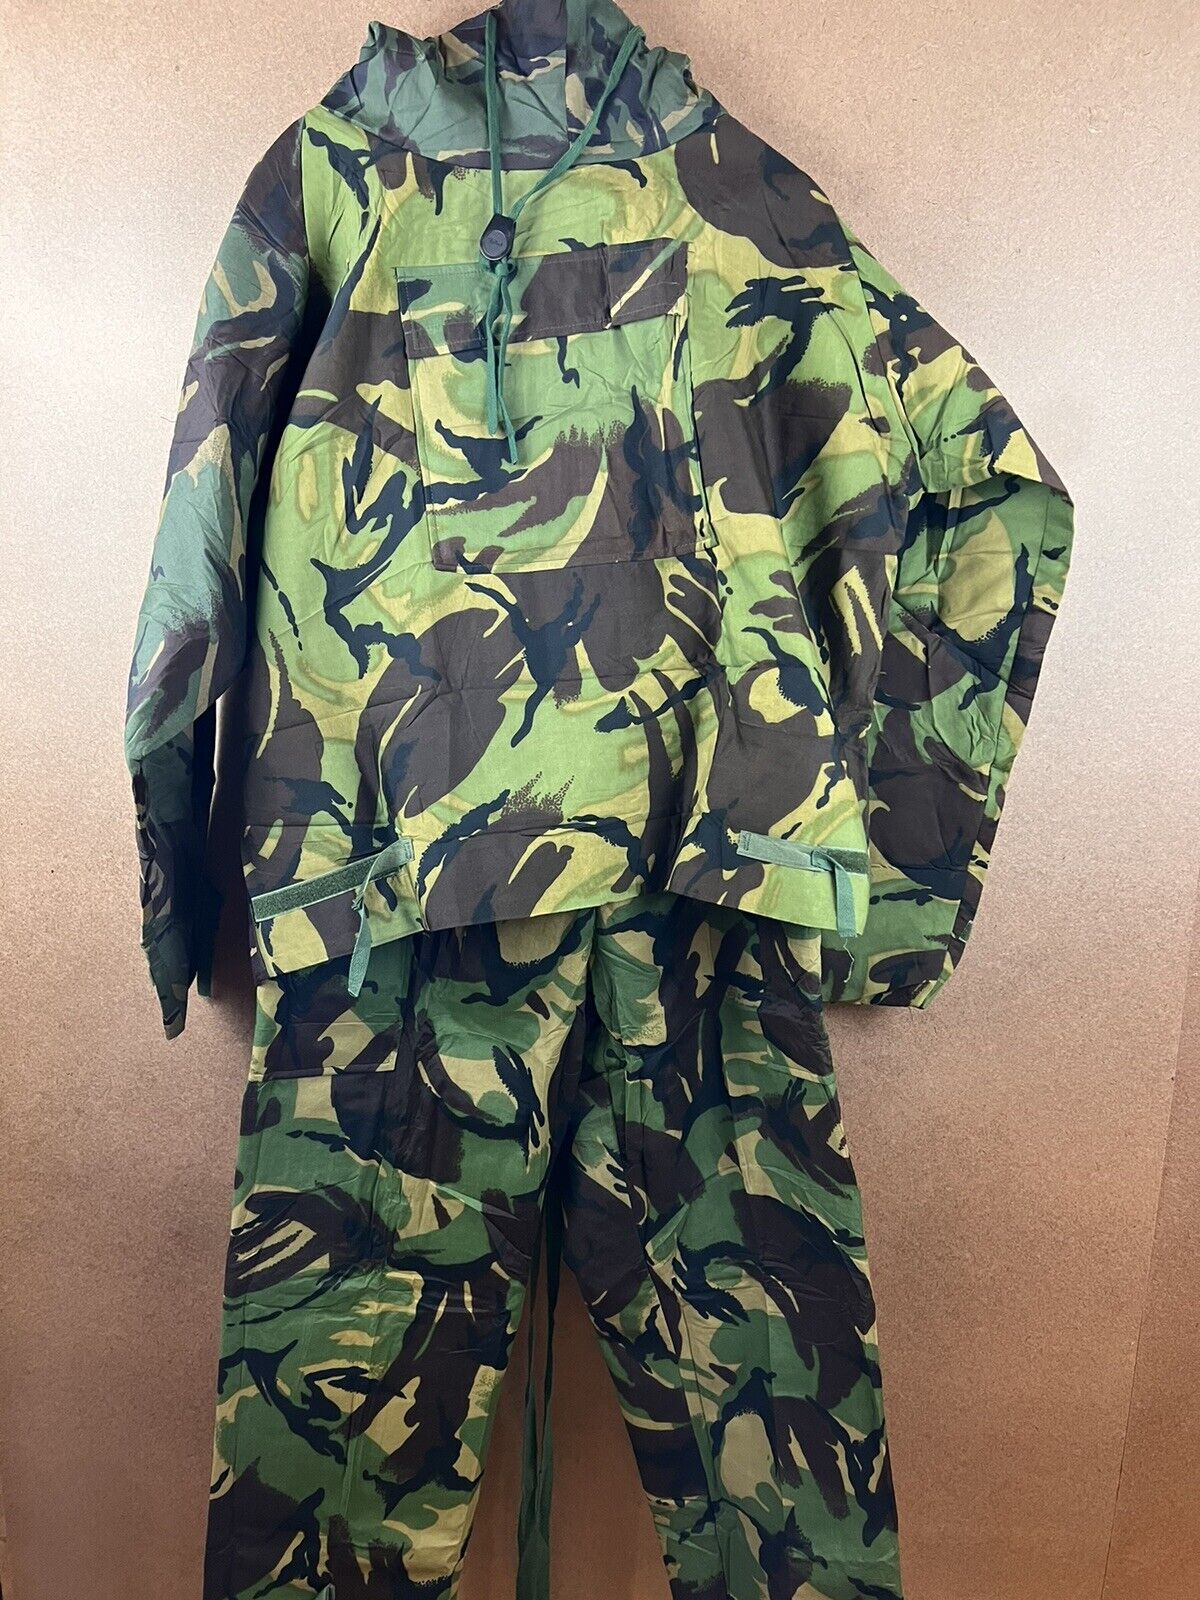 VTG 1984 Deadstock British Camo Military NBC Suit Smock and Trousers L